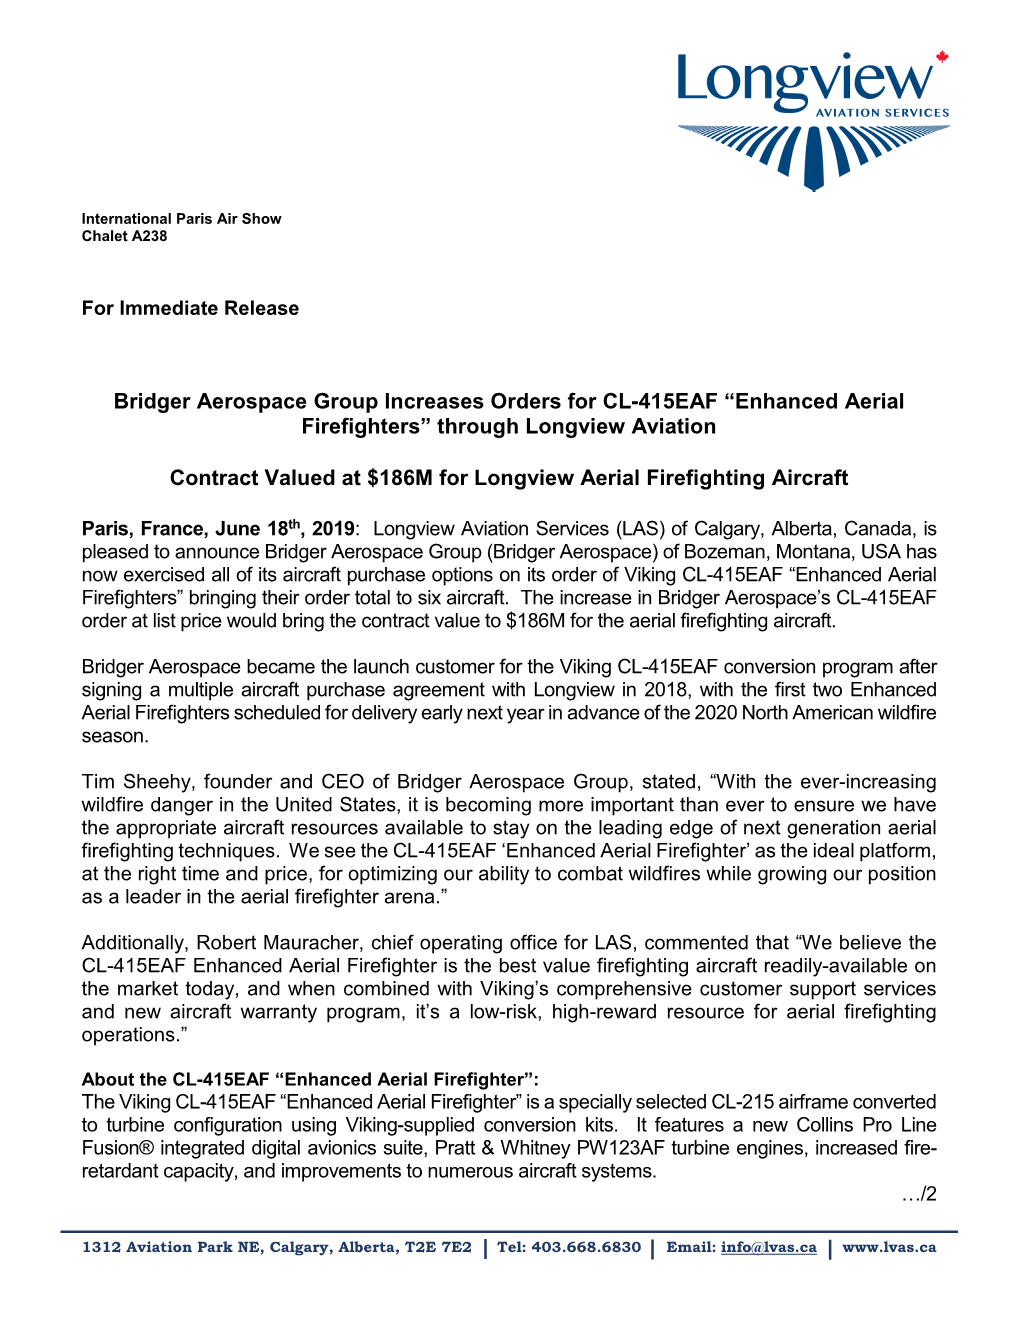 Bridger Aerospace Group Increases Orders for CL-415EAF “Enhanced Aerial Firefighters” Through Longview Aviation